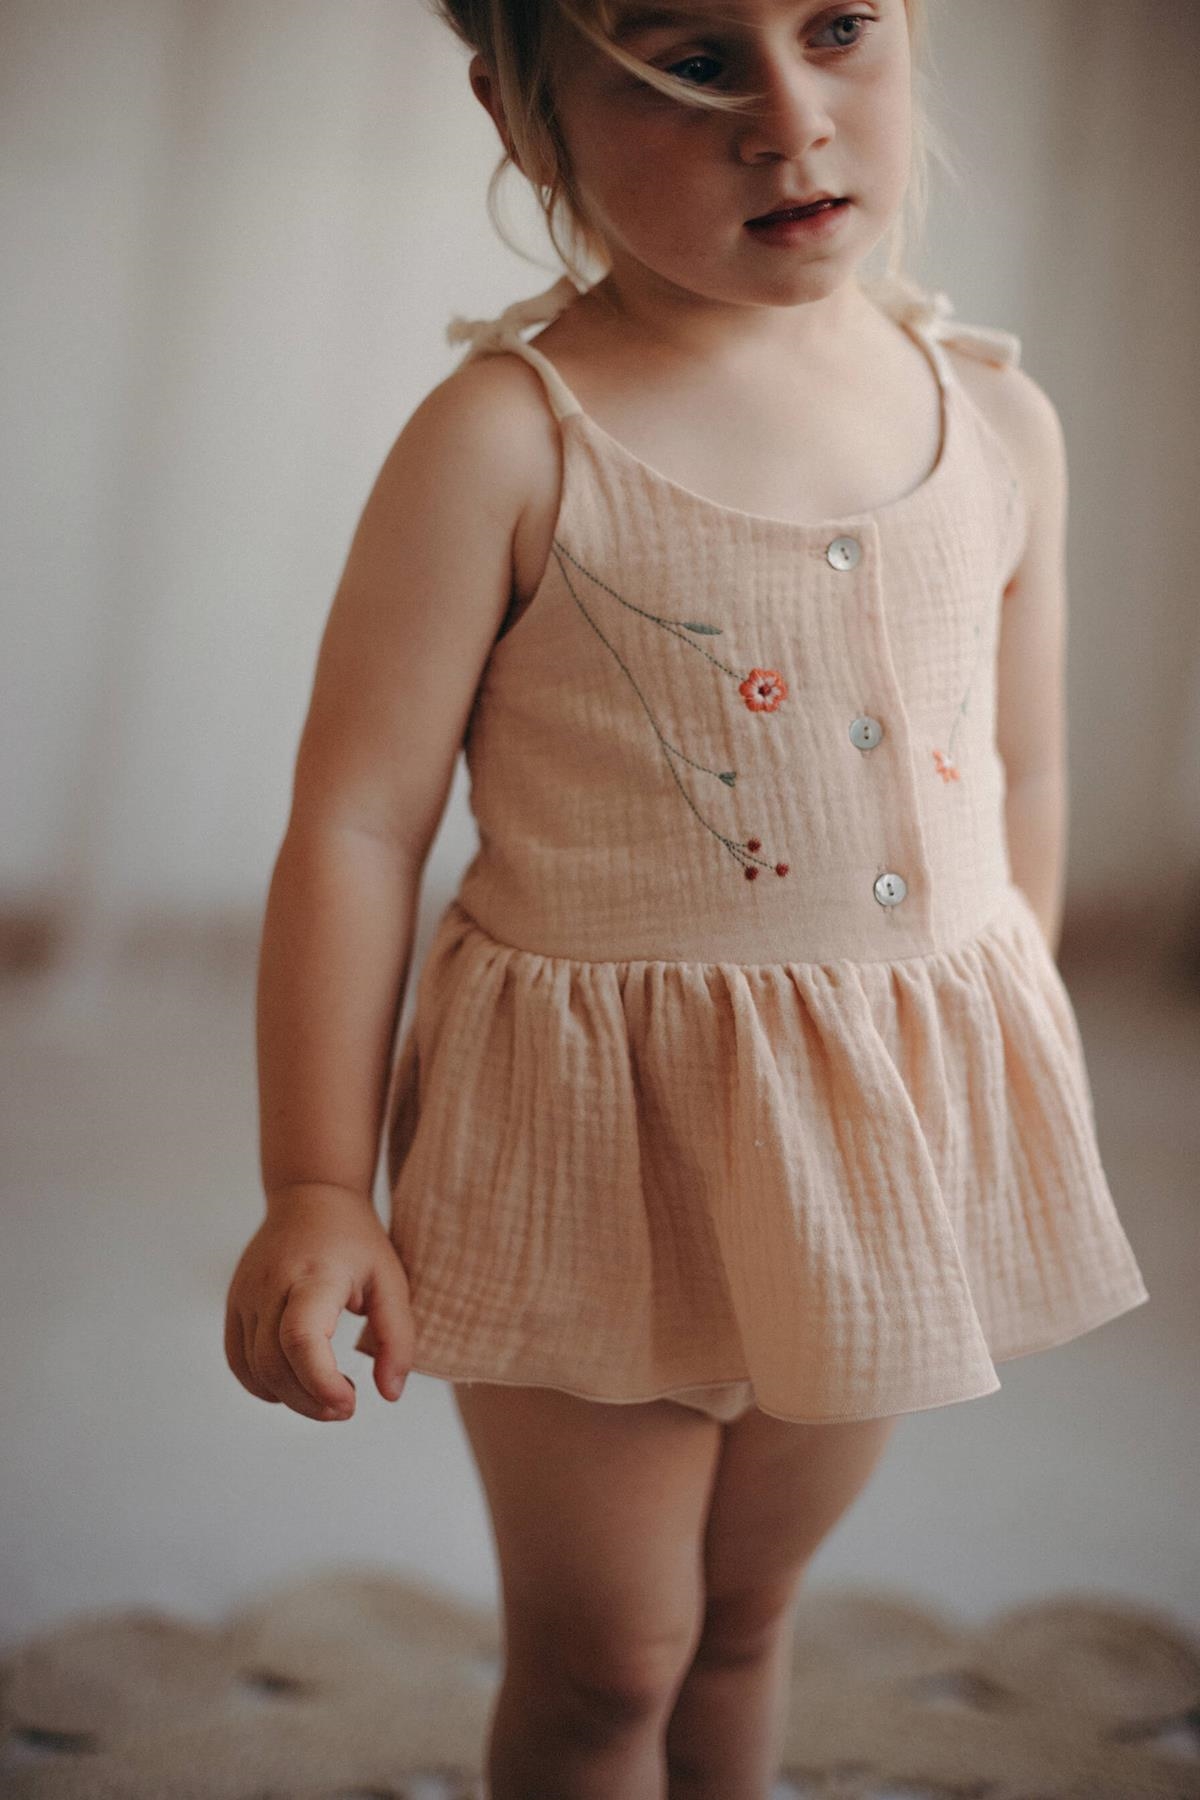 Mod.10.3 Pink organic romper suit with straps | SS23 Mod.10.3 Pink organic romper suit with straps